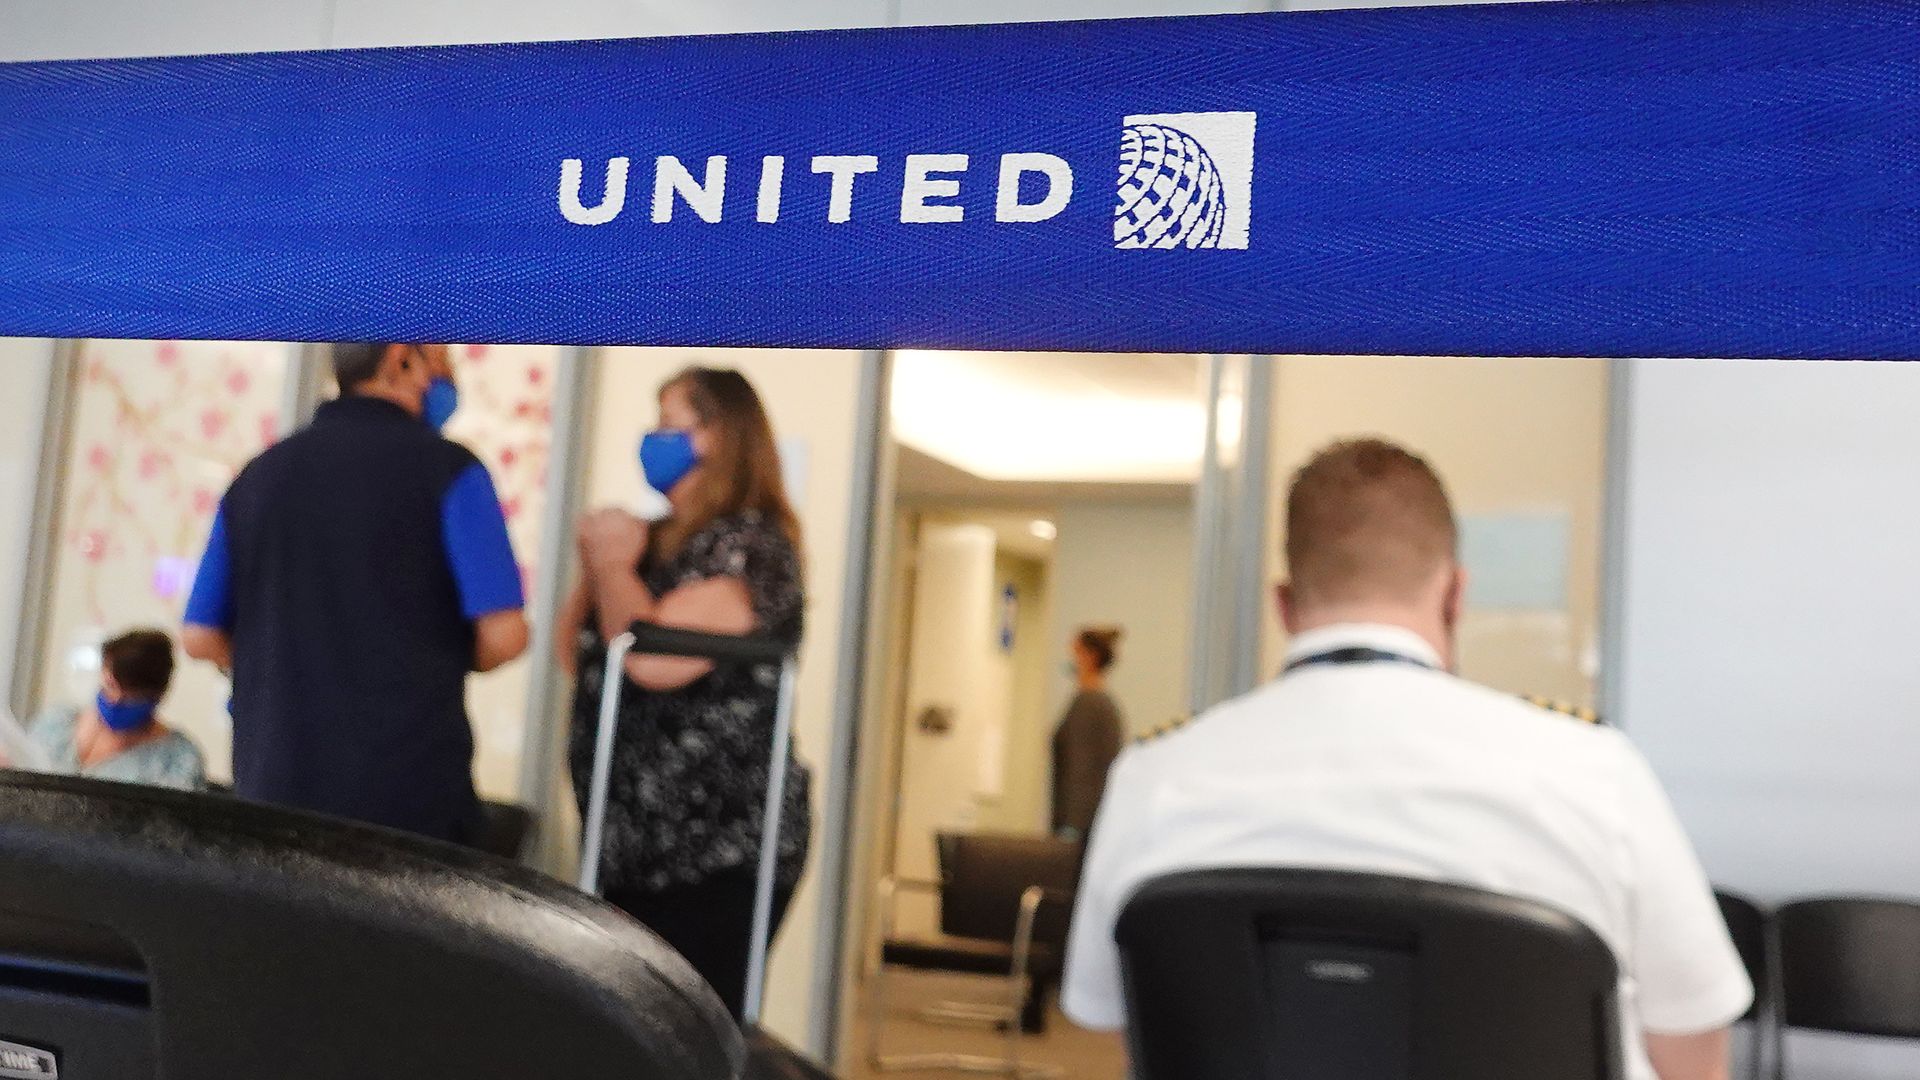 United Airlines workers arrive to receive COVID-19 vaccines at United's onsite clinic at O'Hare International Airport on March 09, 2021 in Chicago, Illinois. 